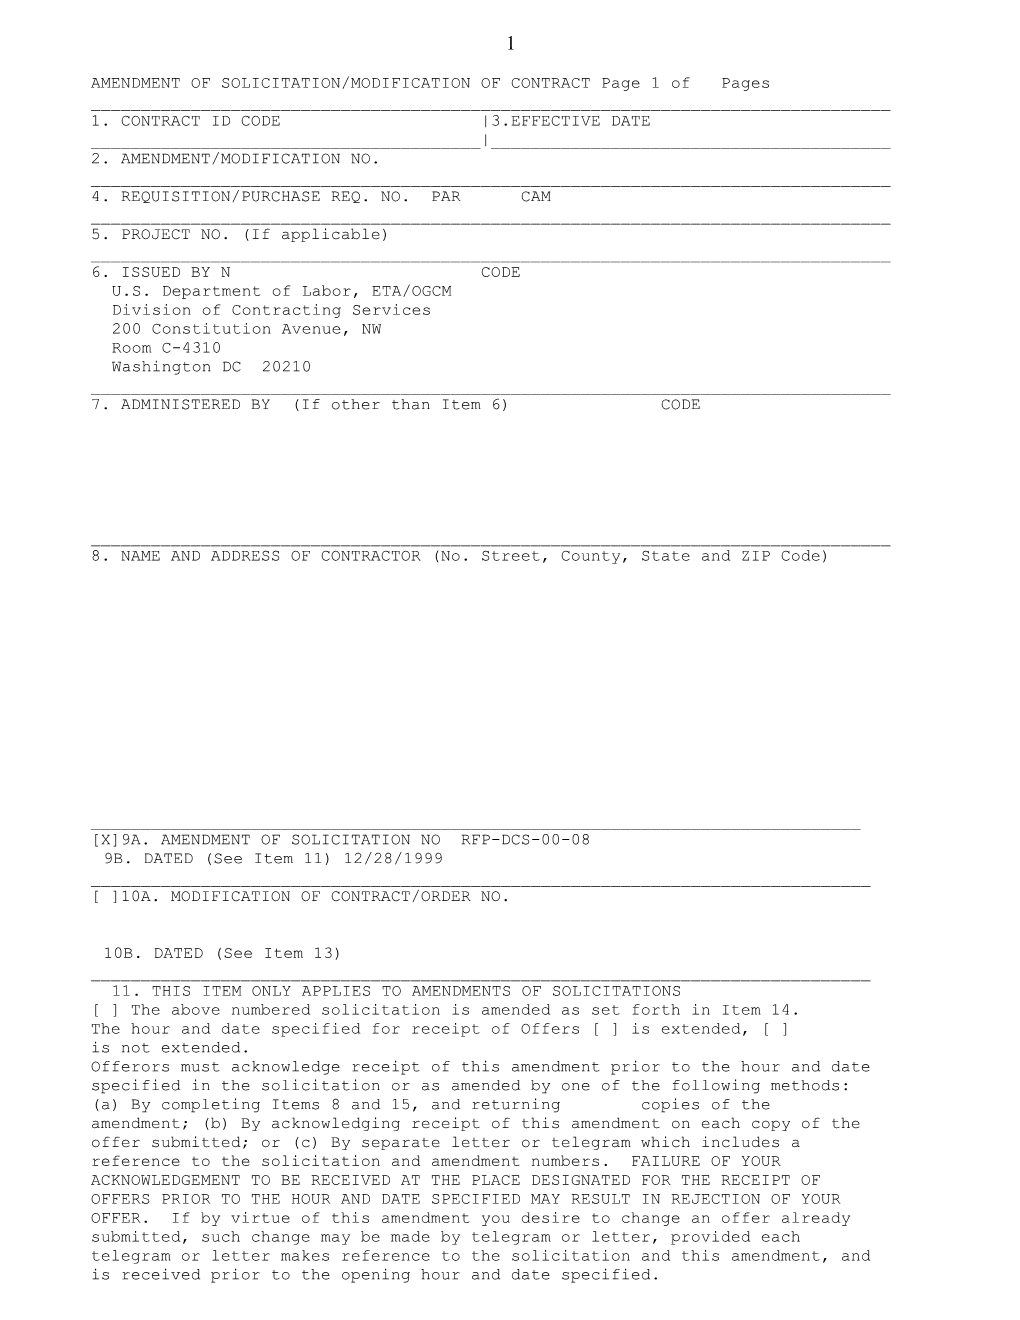 AMENDMENT of SOLICITATION/MODIFICATION of CONTRACT Page 1 of Pages